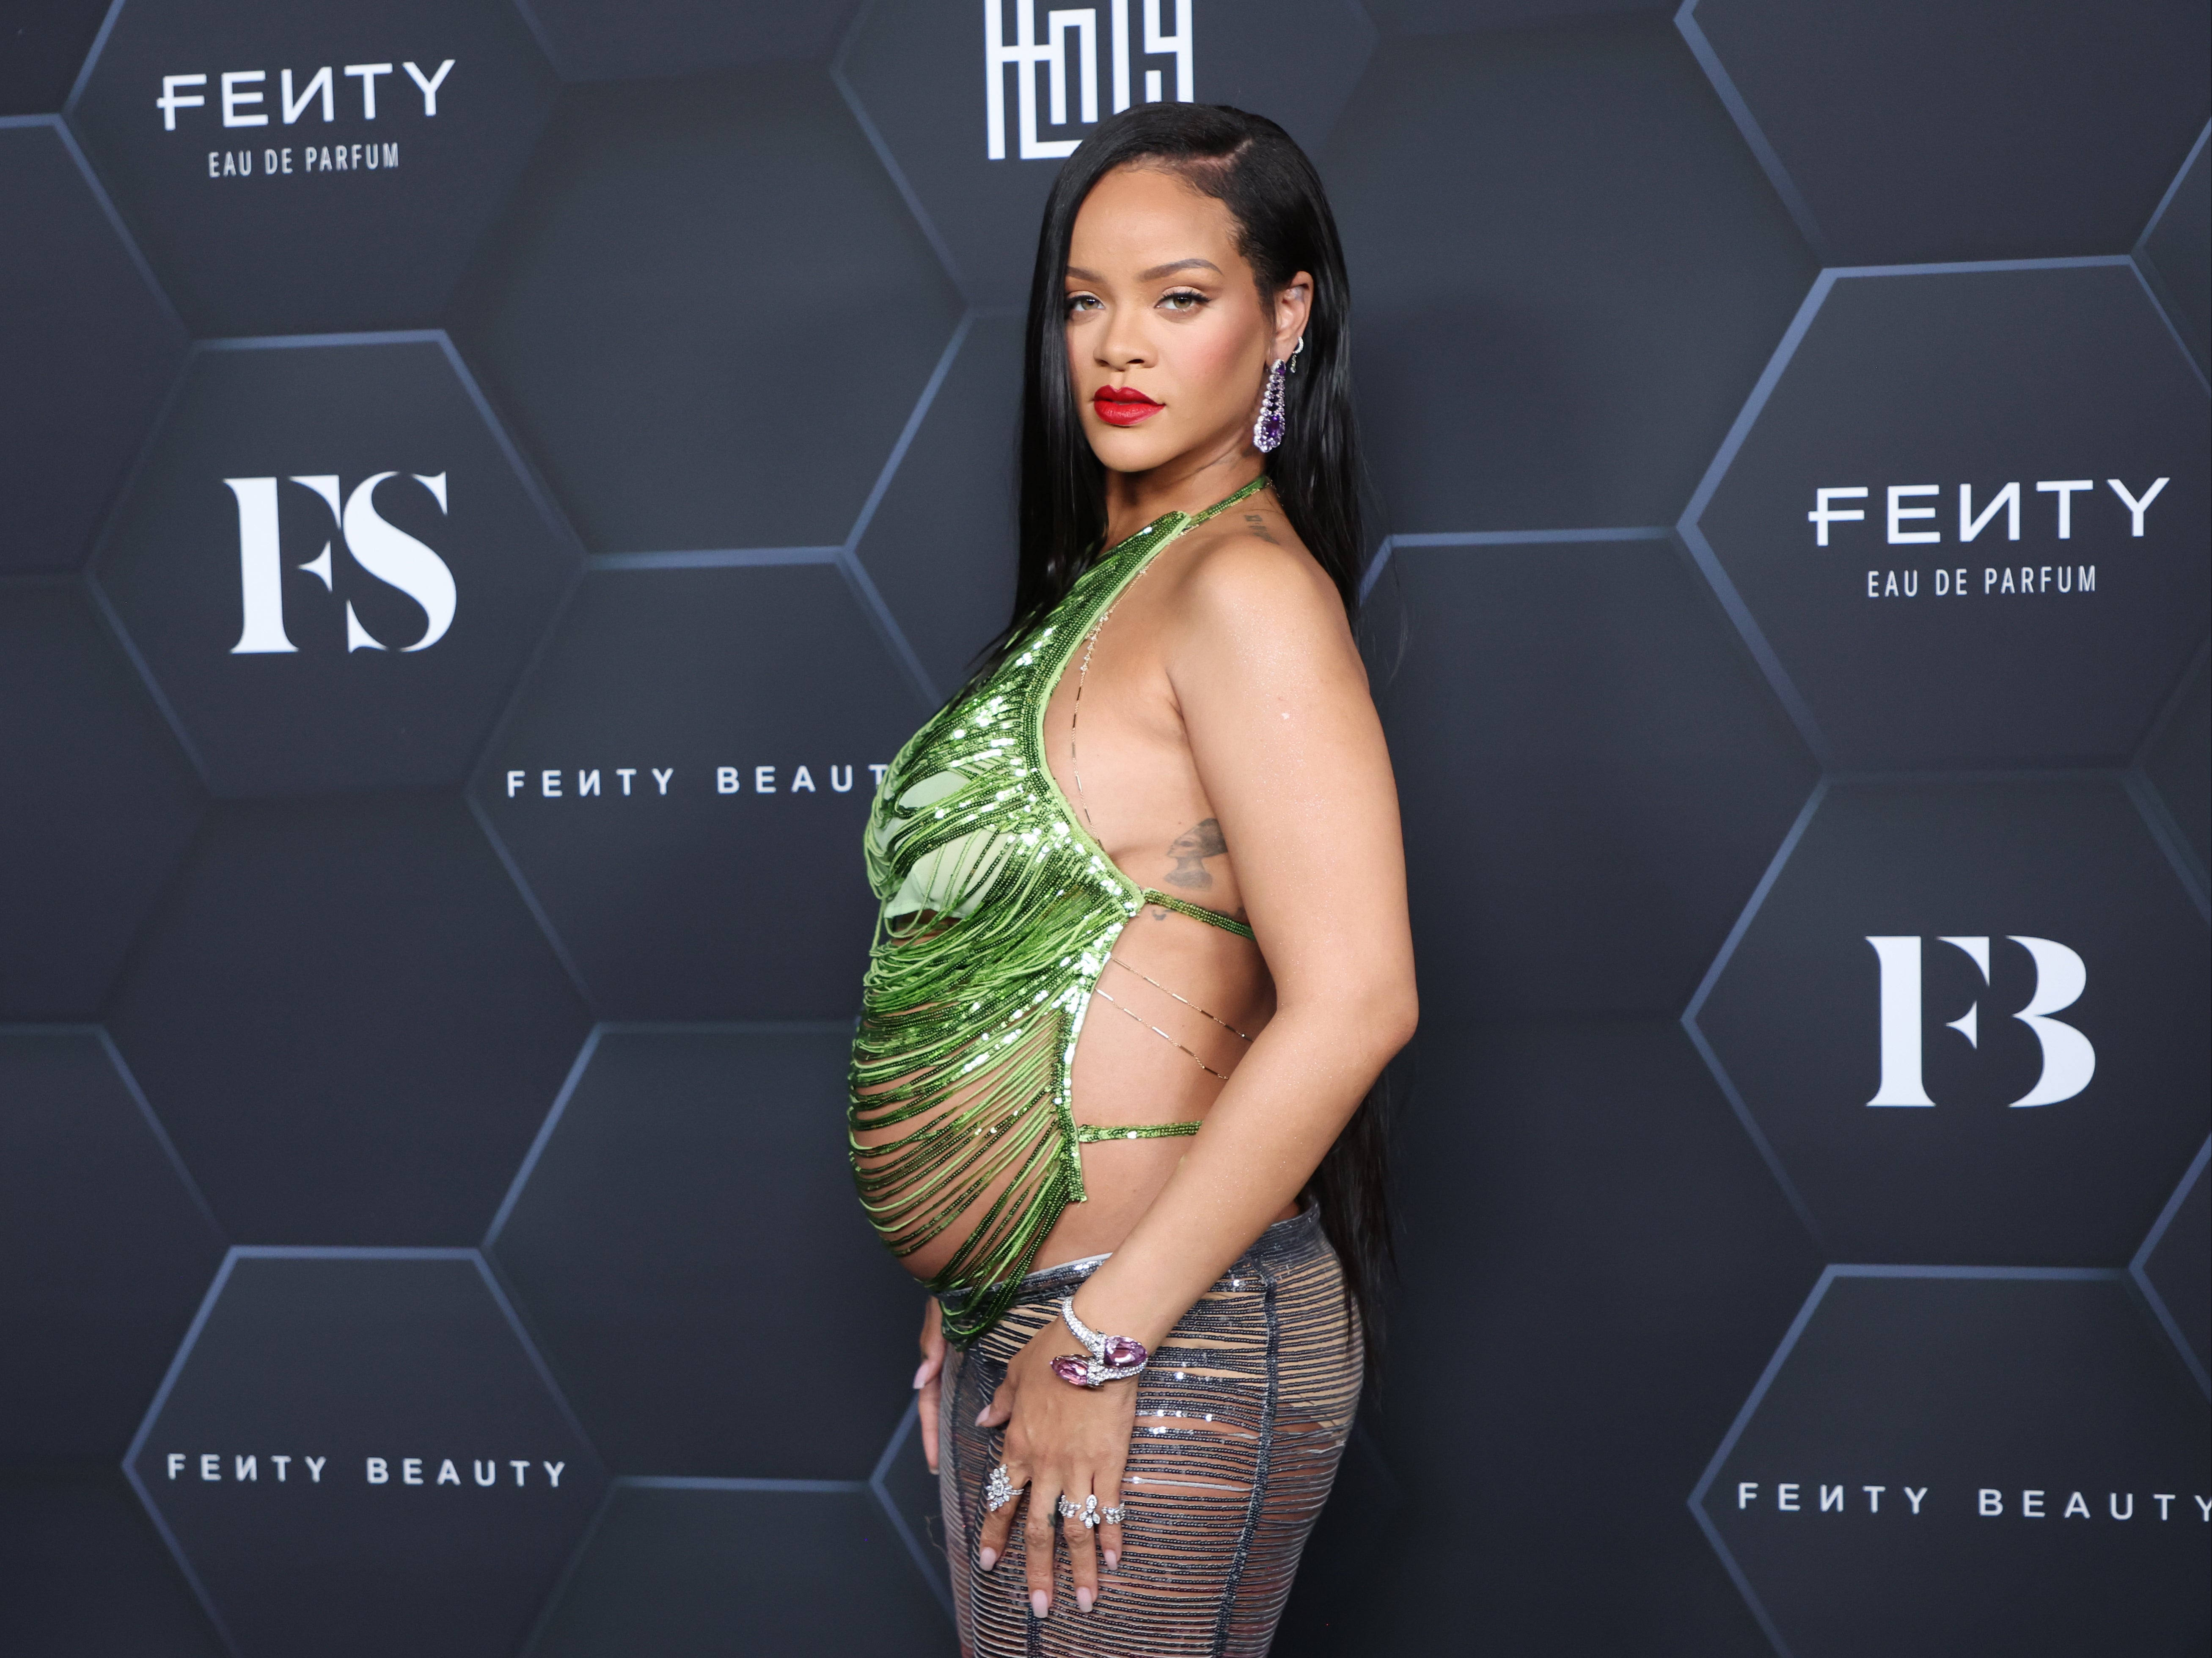 Rihanna's maternity fashion: From streetwear to red carpet glamour